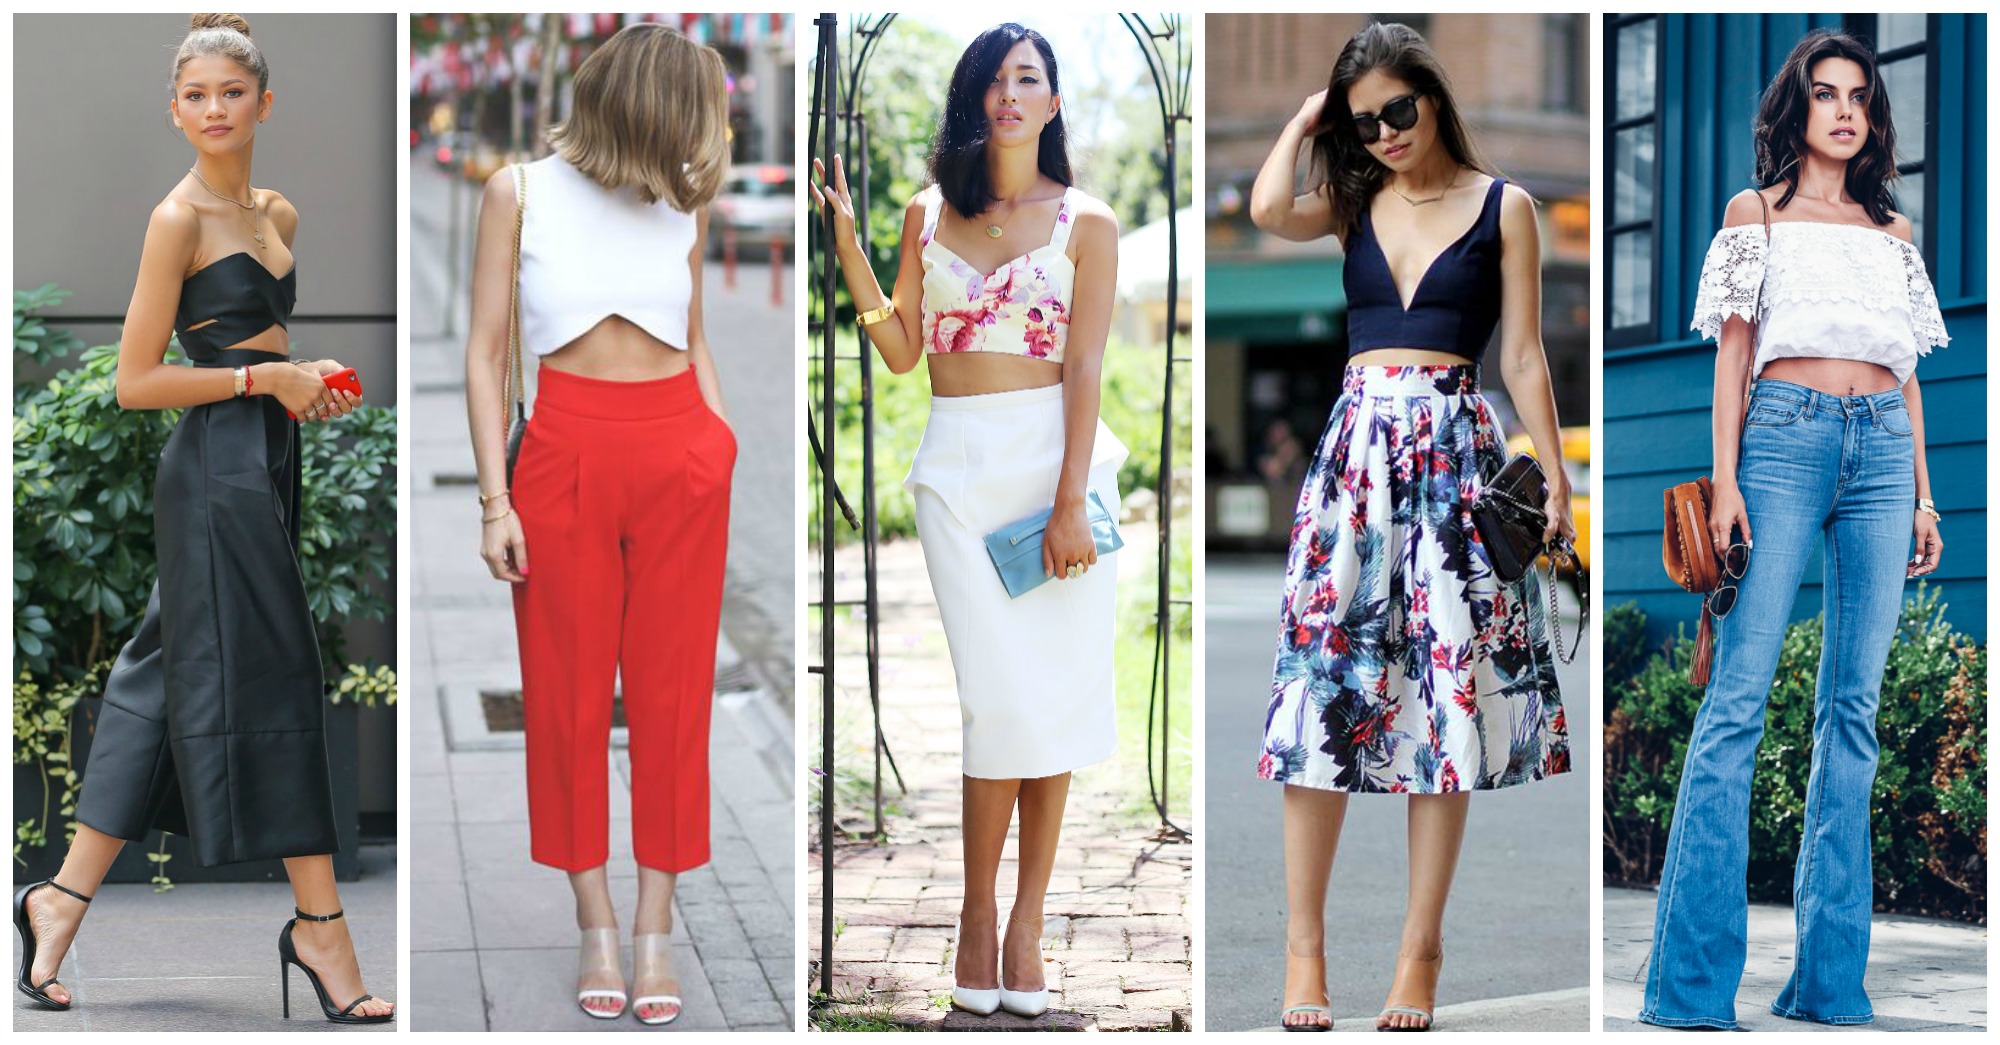 10 Fabulous Street Style Combos With Crop Tops